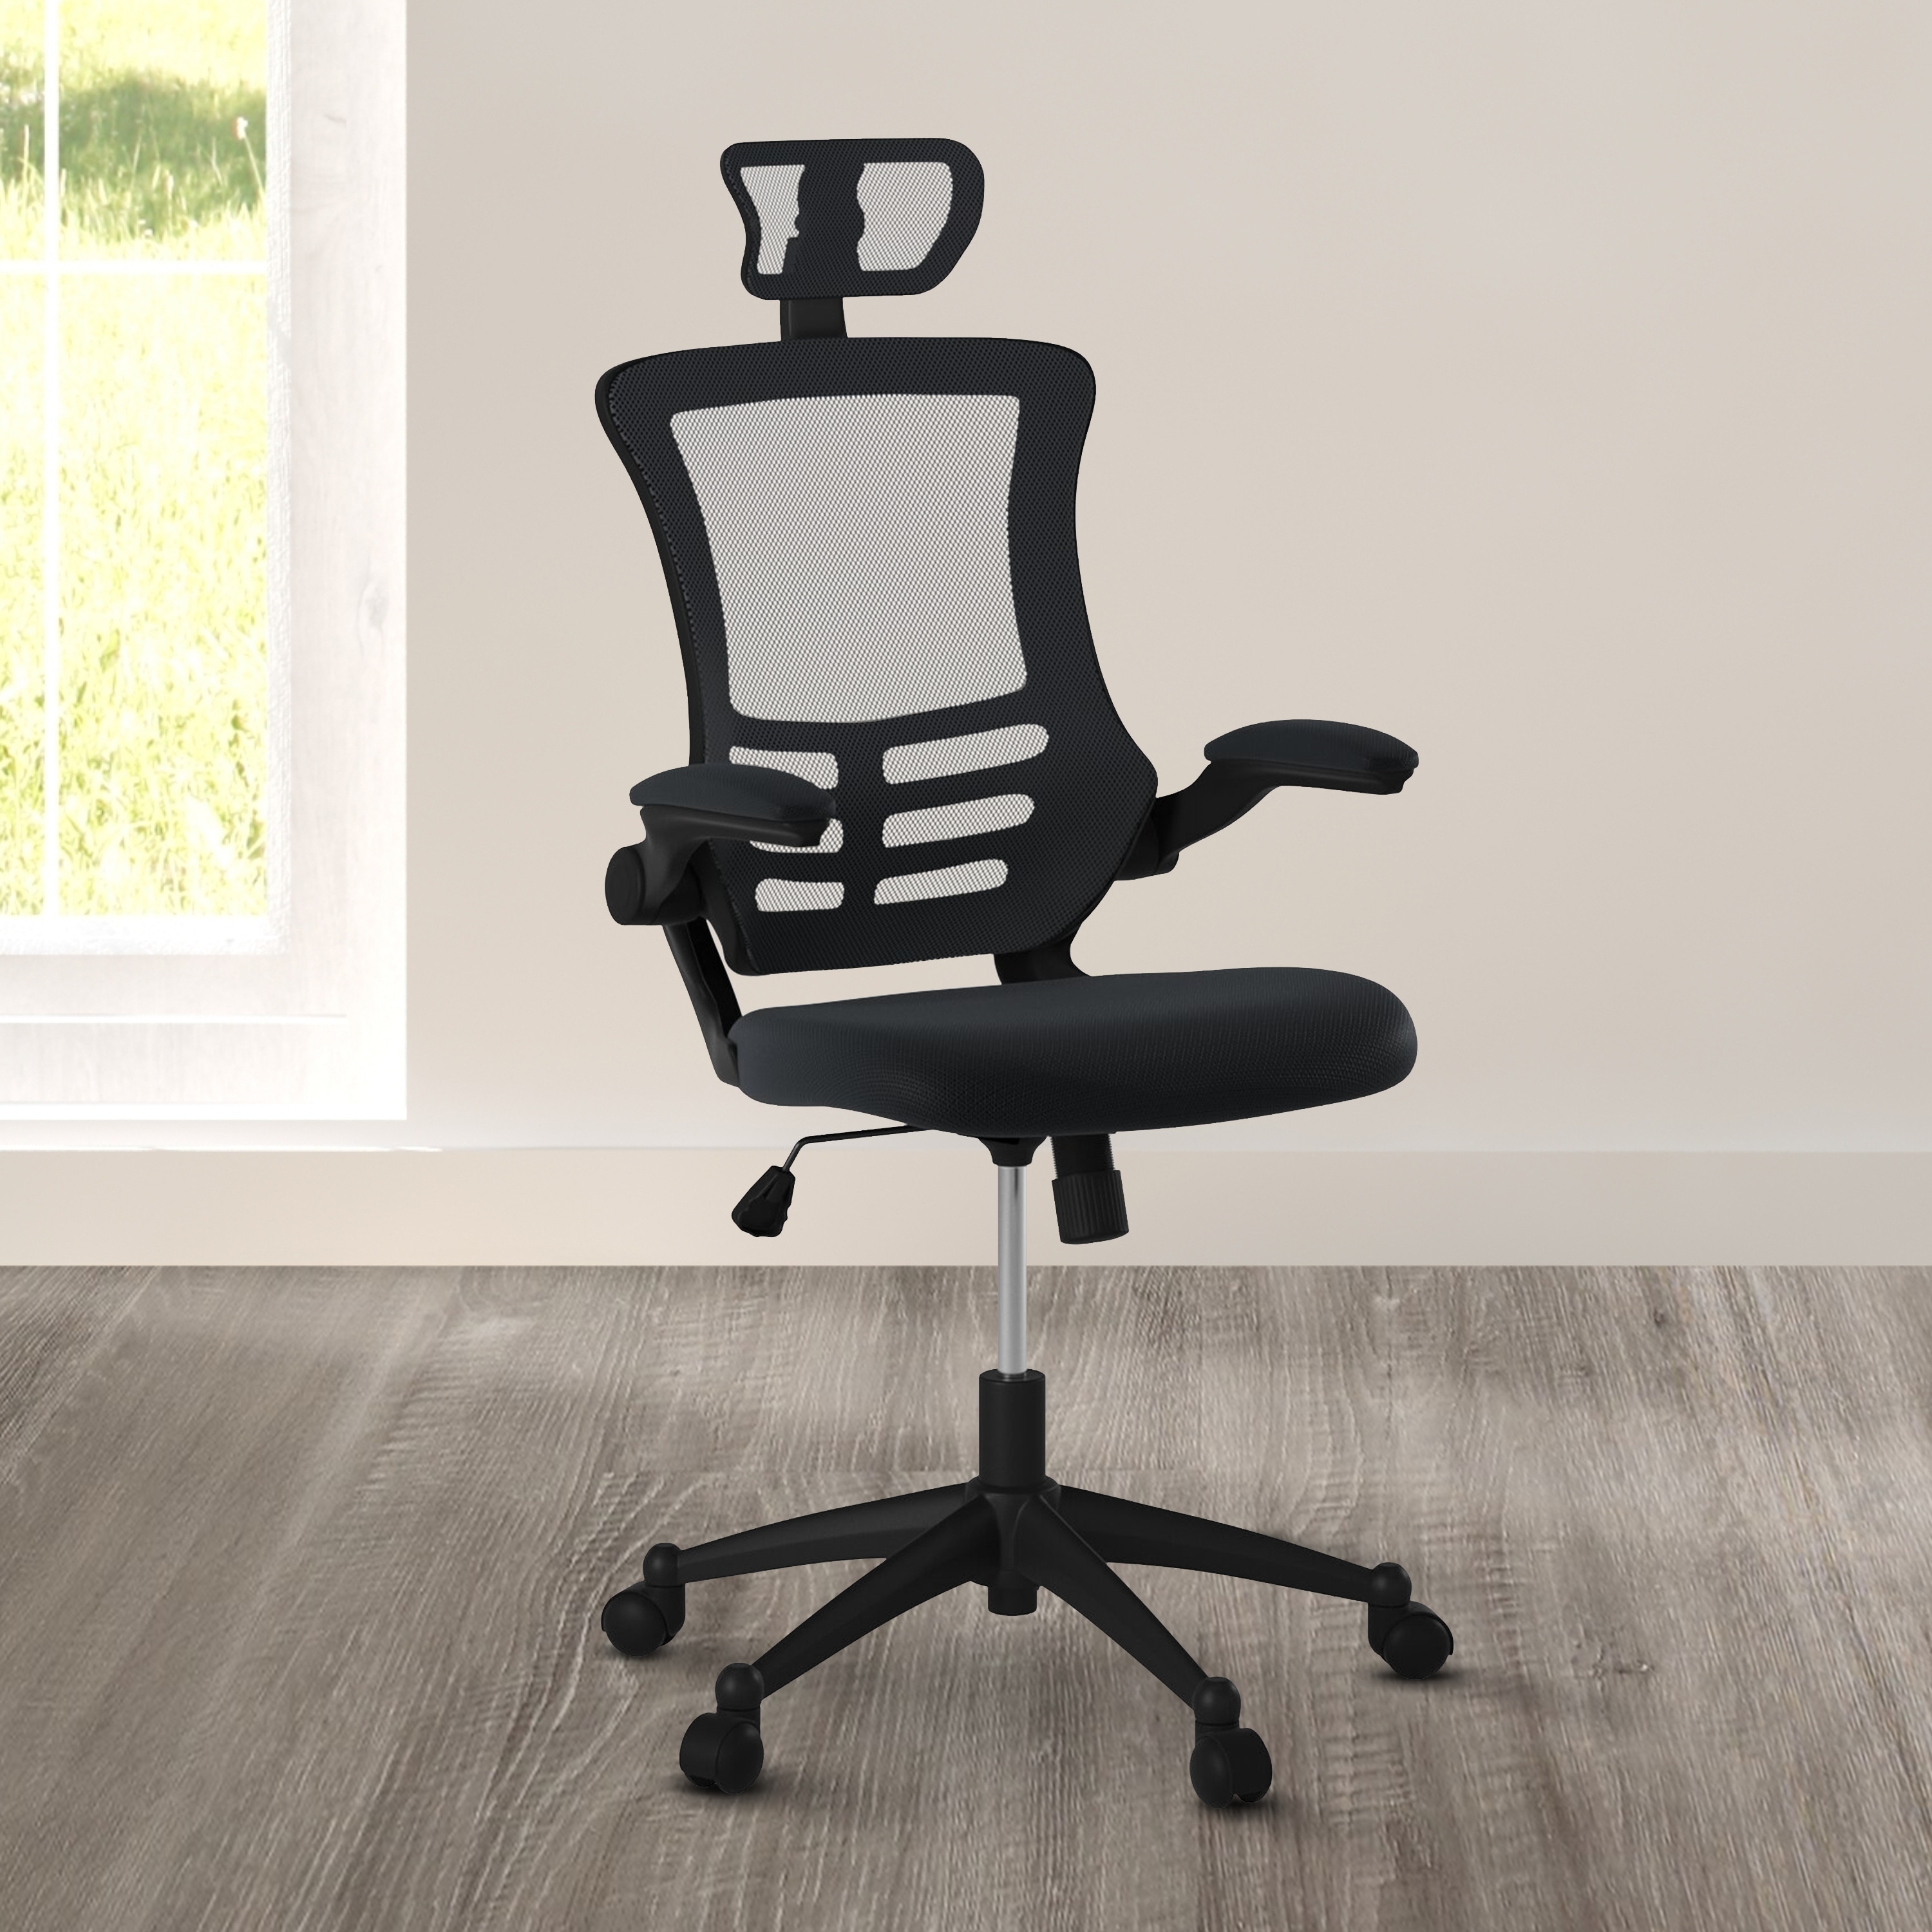 https://ak1.ostkcdn.com/images/products/is/images/direct/5a56d44731cd87716c49bc5474ce3026b8f39914/Modern-High-Back-Mesh-Executive-Office-Chair-with-Headrest-and-Flip-Up-Arms%2C-Black.jpg